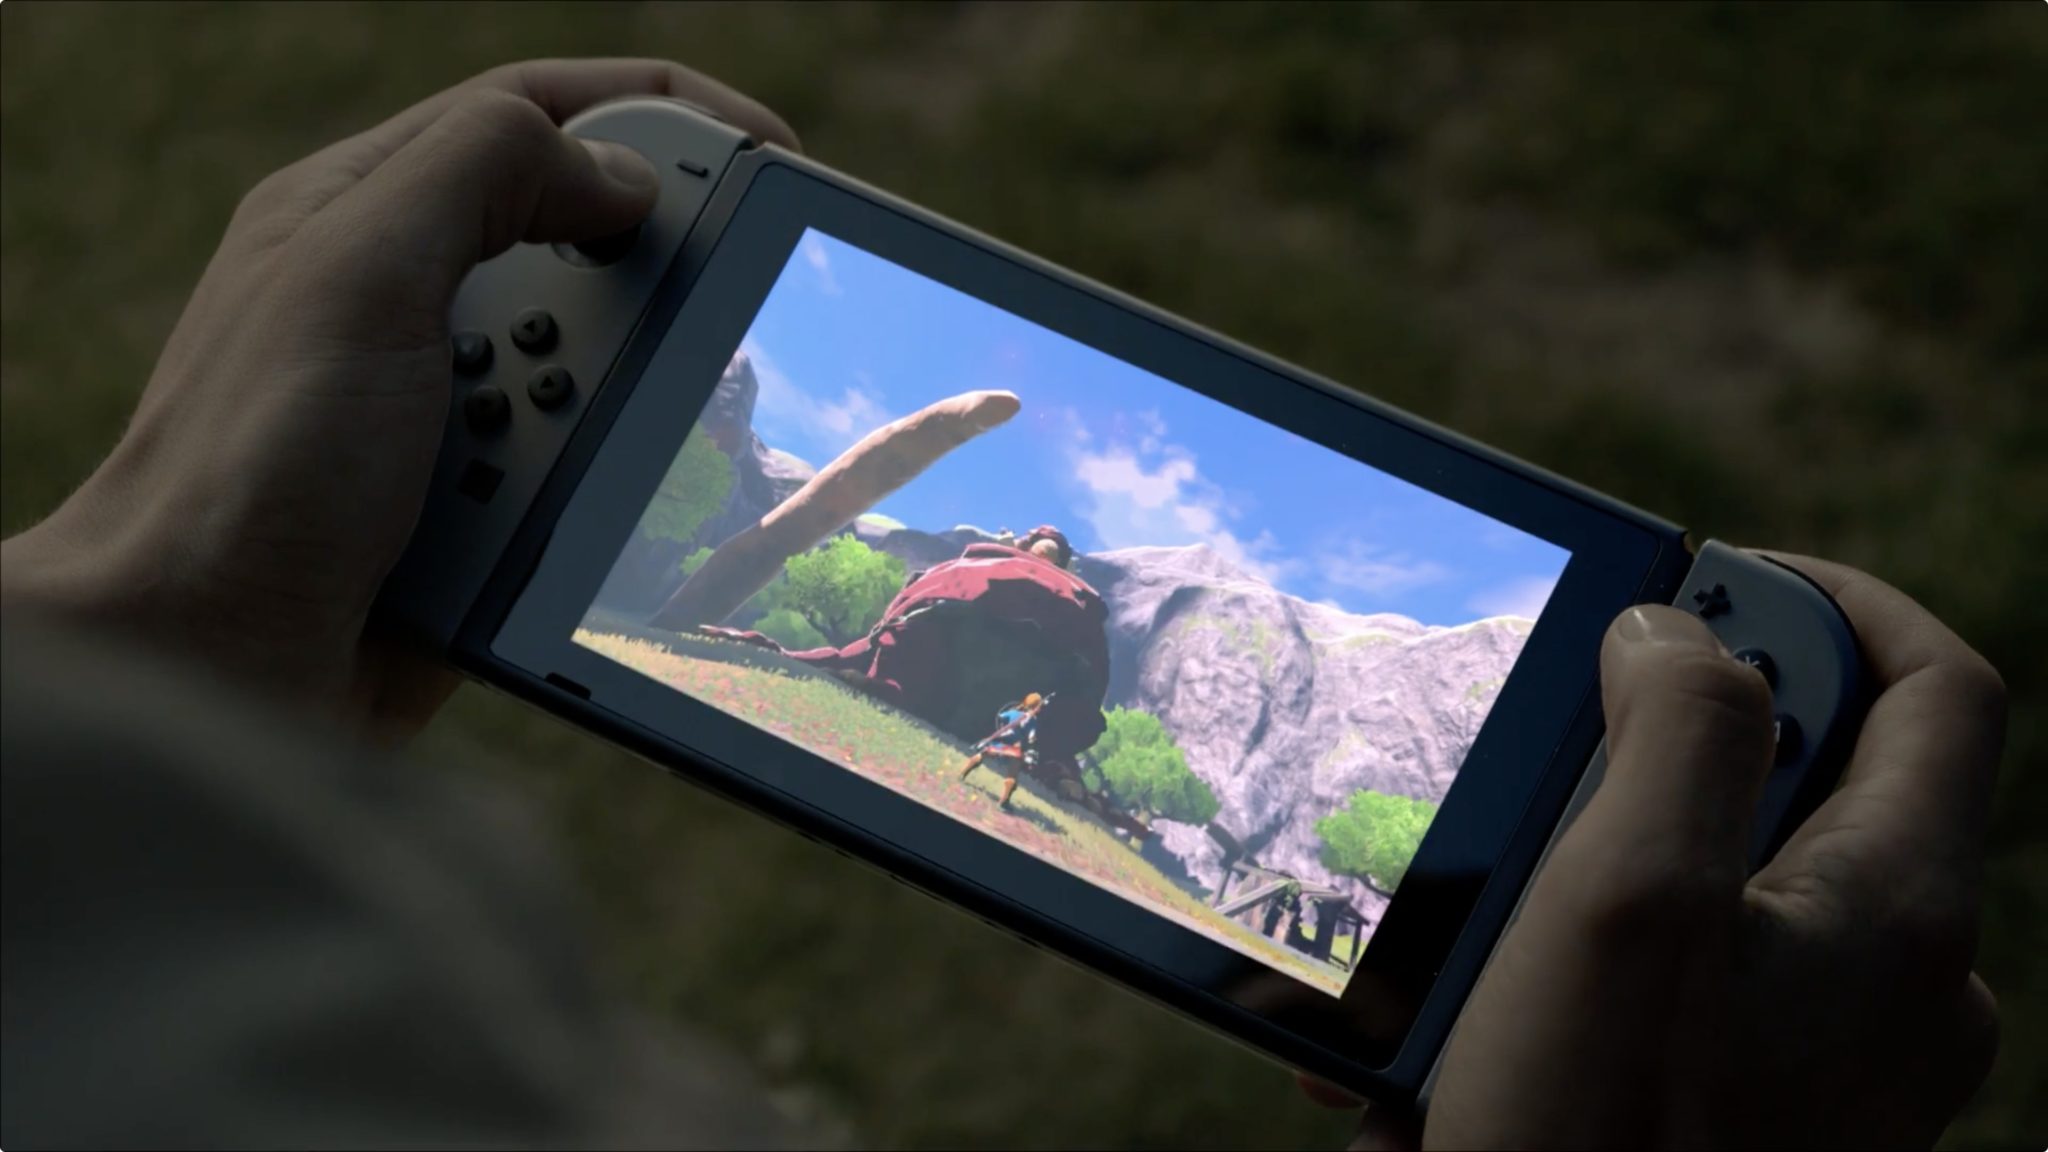 How to Start Developing for the Nintendo Switch | Dice.com Career Advice